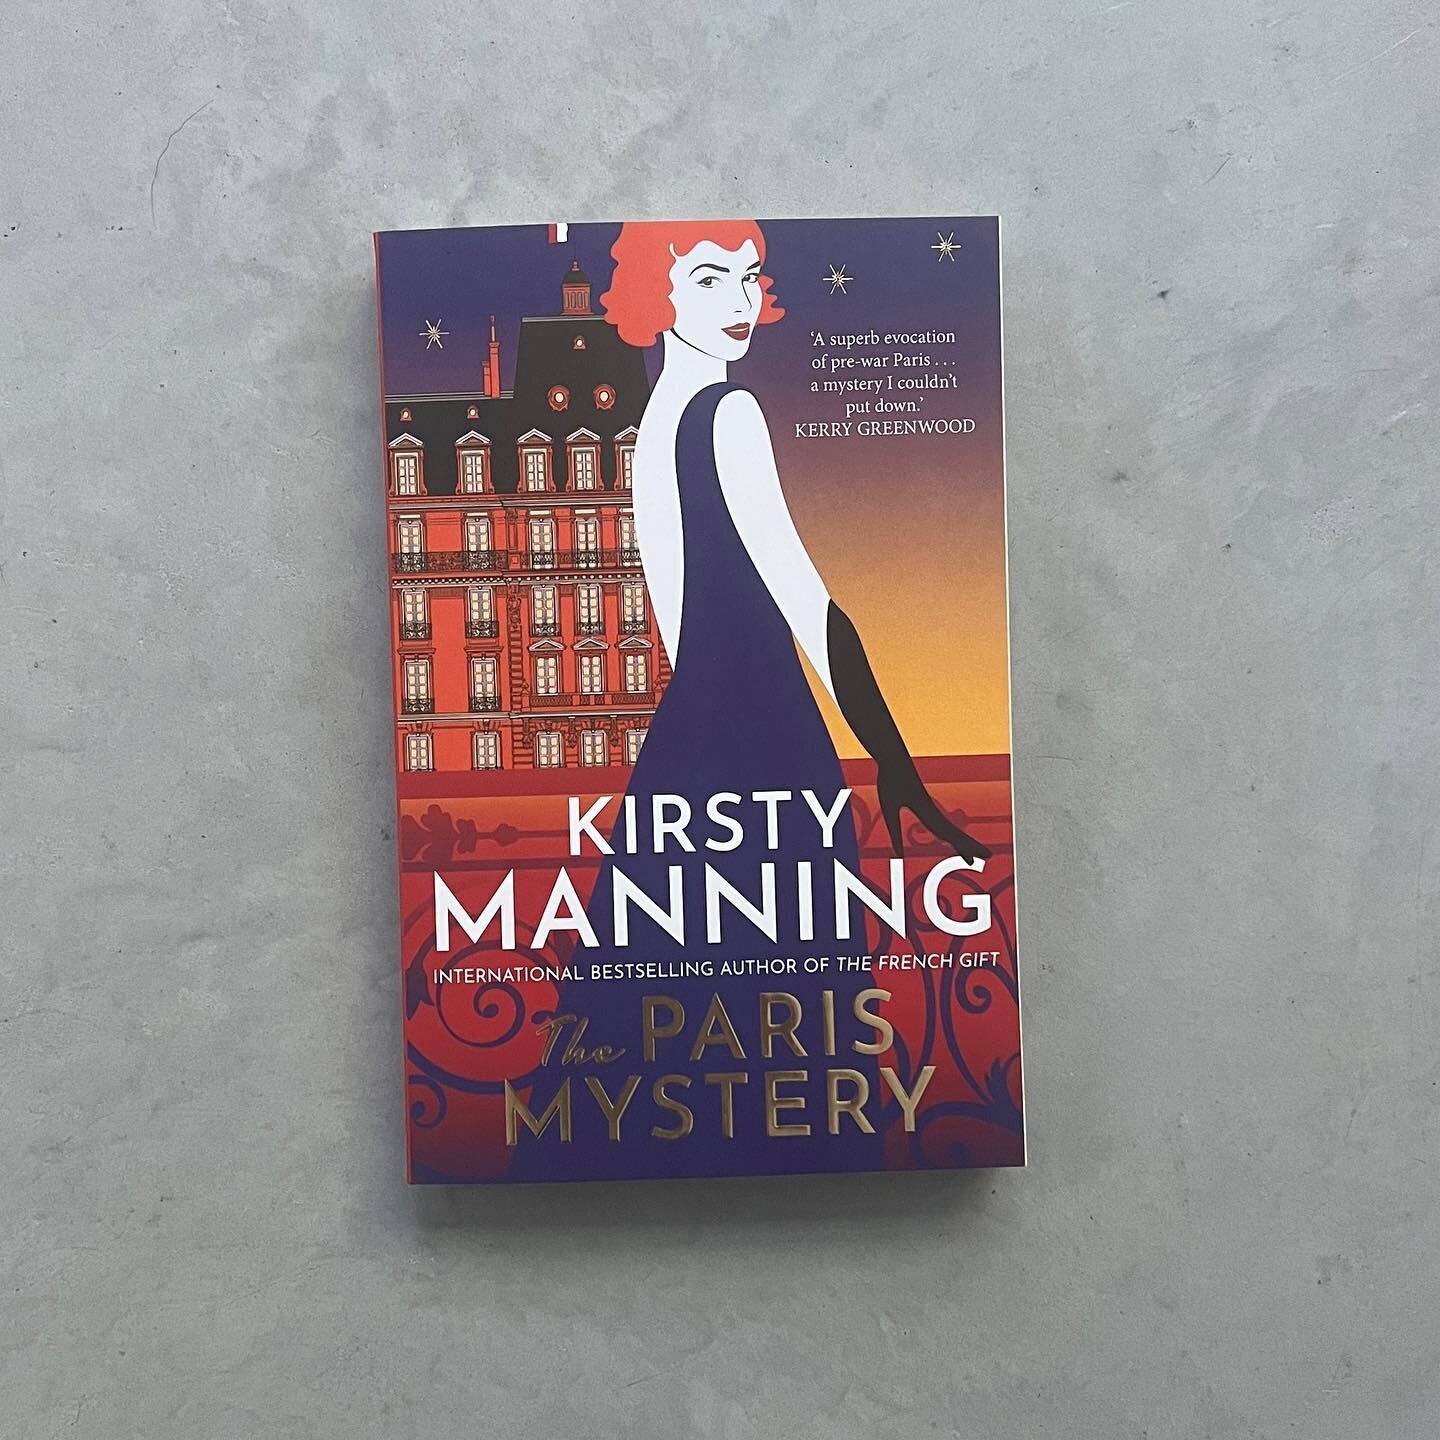 Join intrepid reporter Charlie James in Paris in the first in a joyful new mystery series from
@kirstymanningau Comgratulations and Happy Publication Kirsty!
#happypublication @allenandunwin